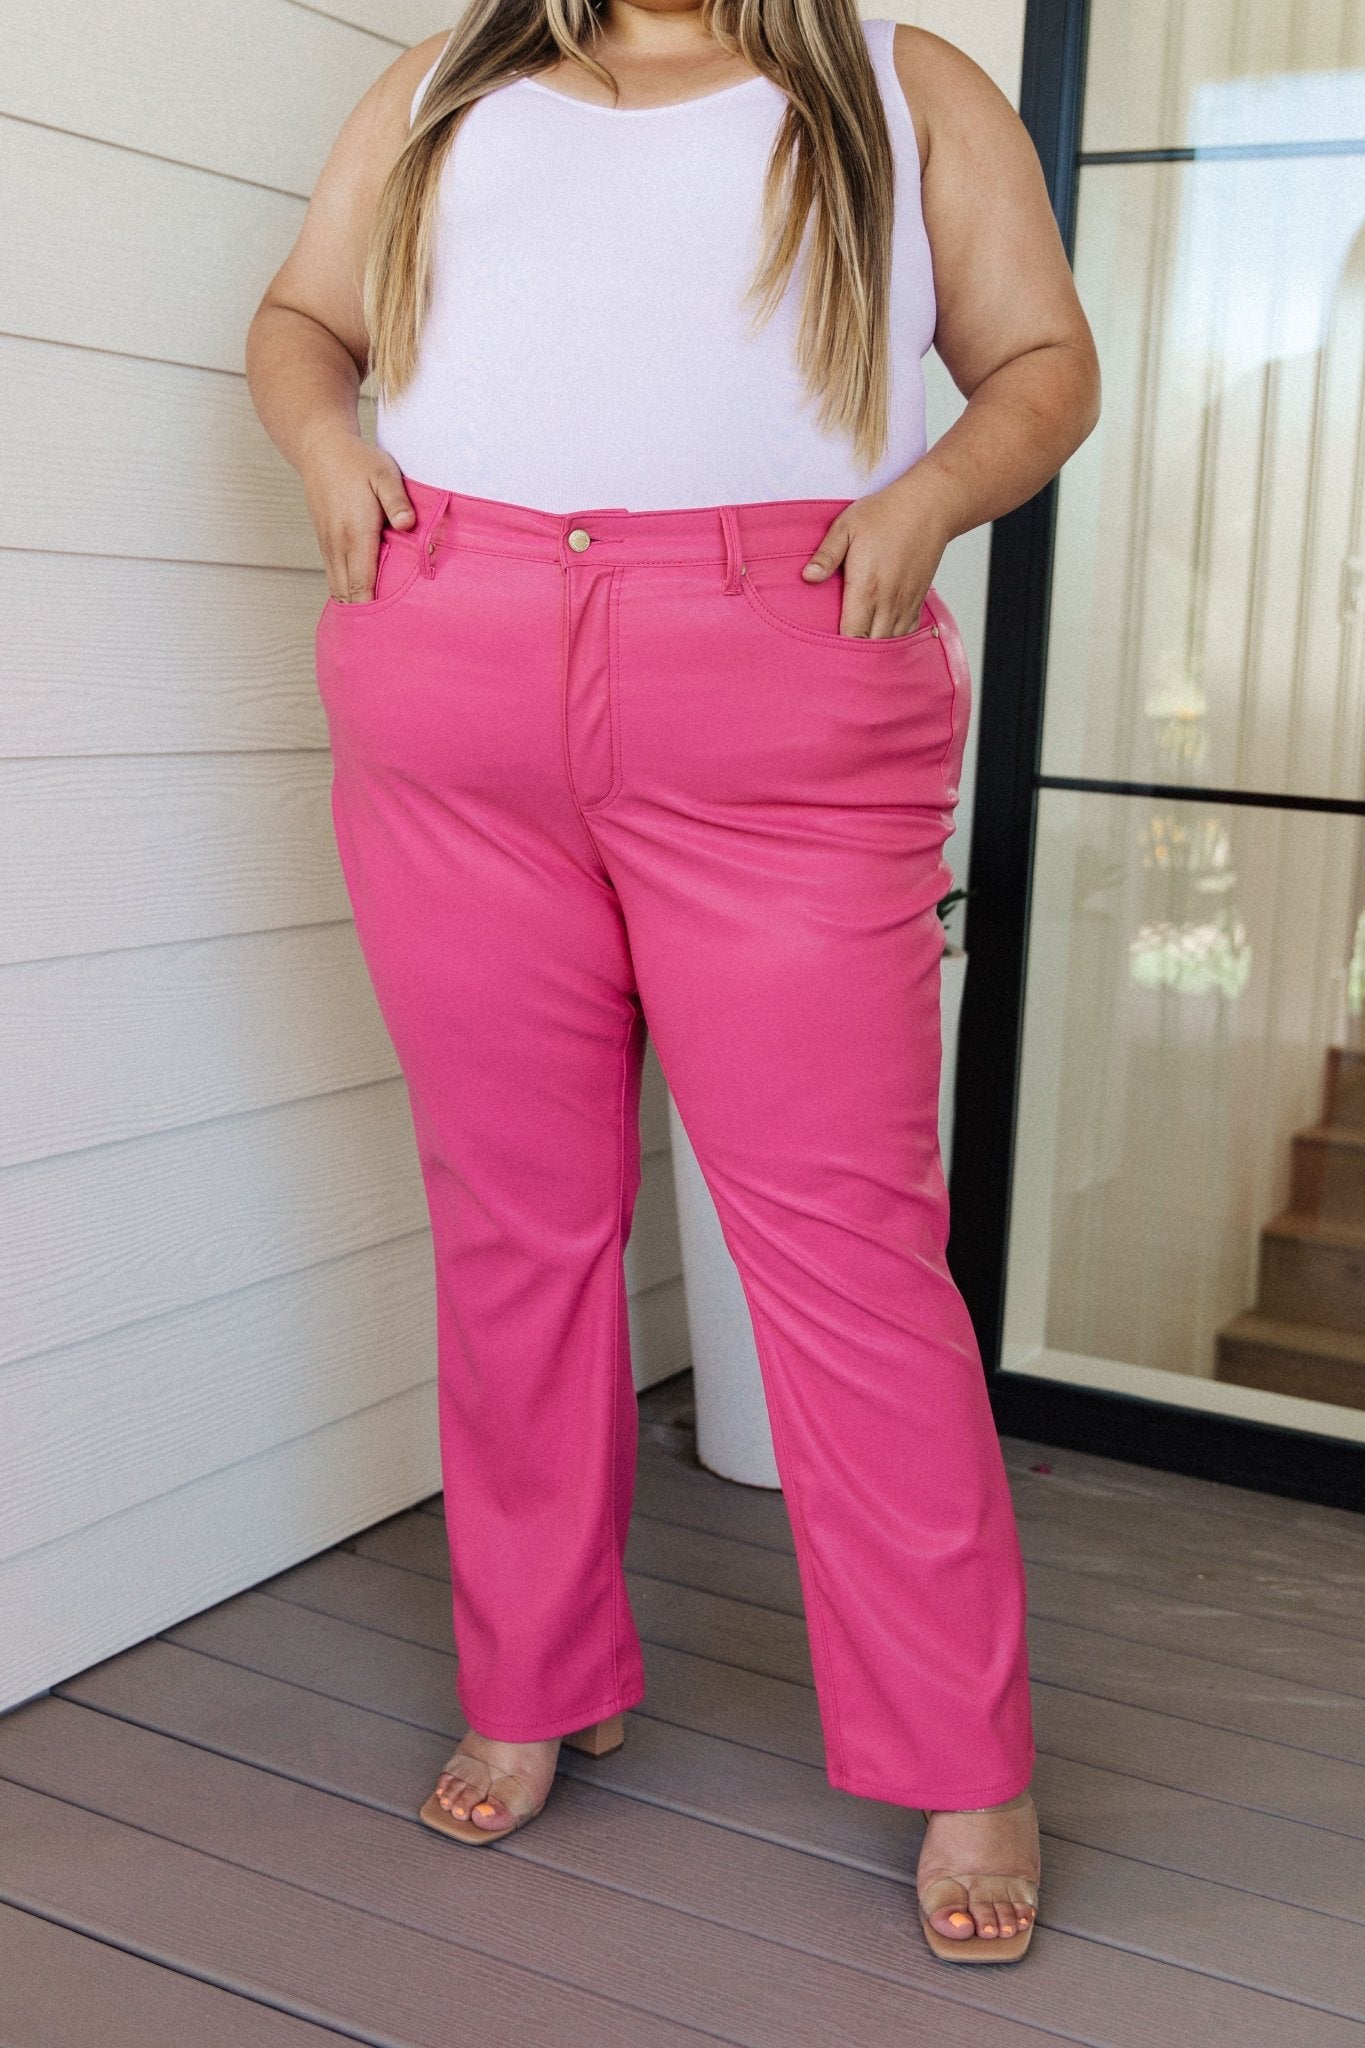 Tanya Control Top Faux Leather Pants in Hot Pink - PEONIES & LIME